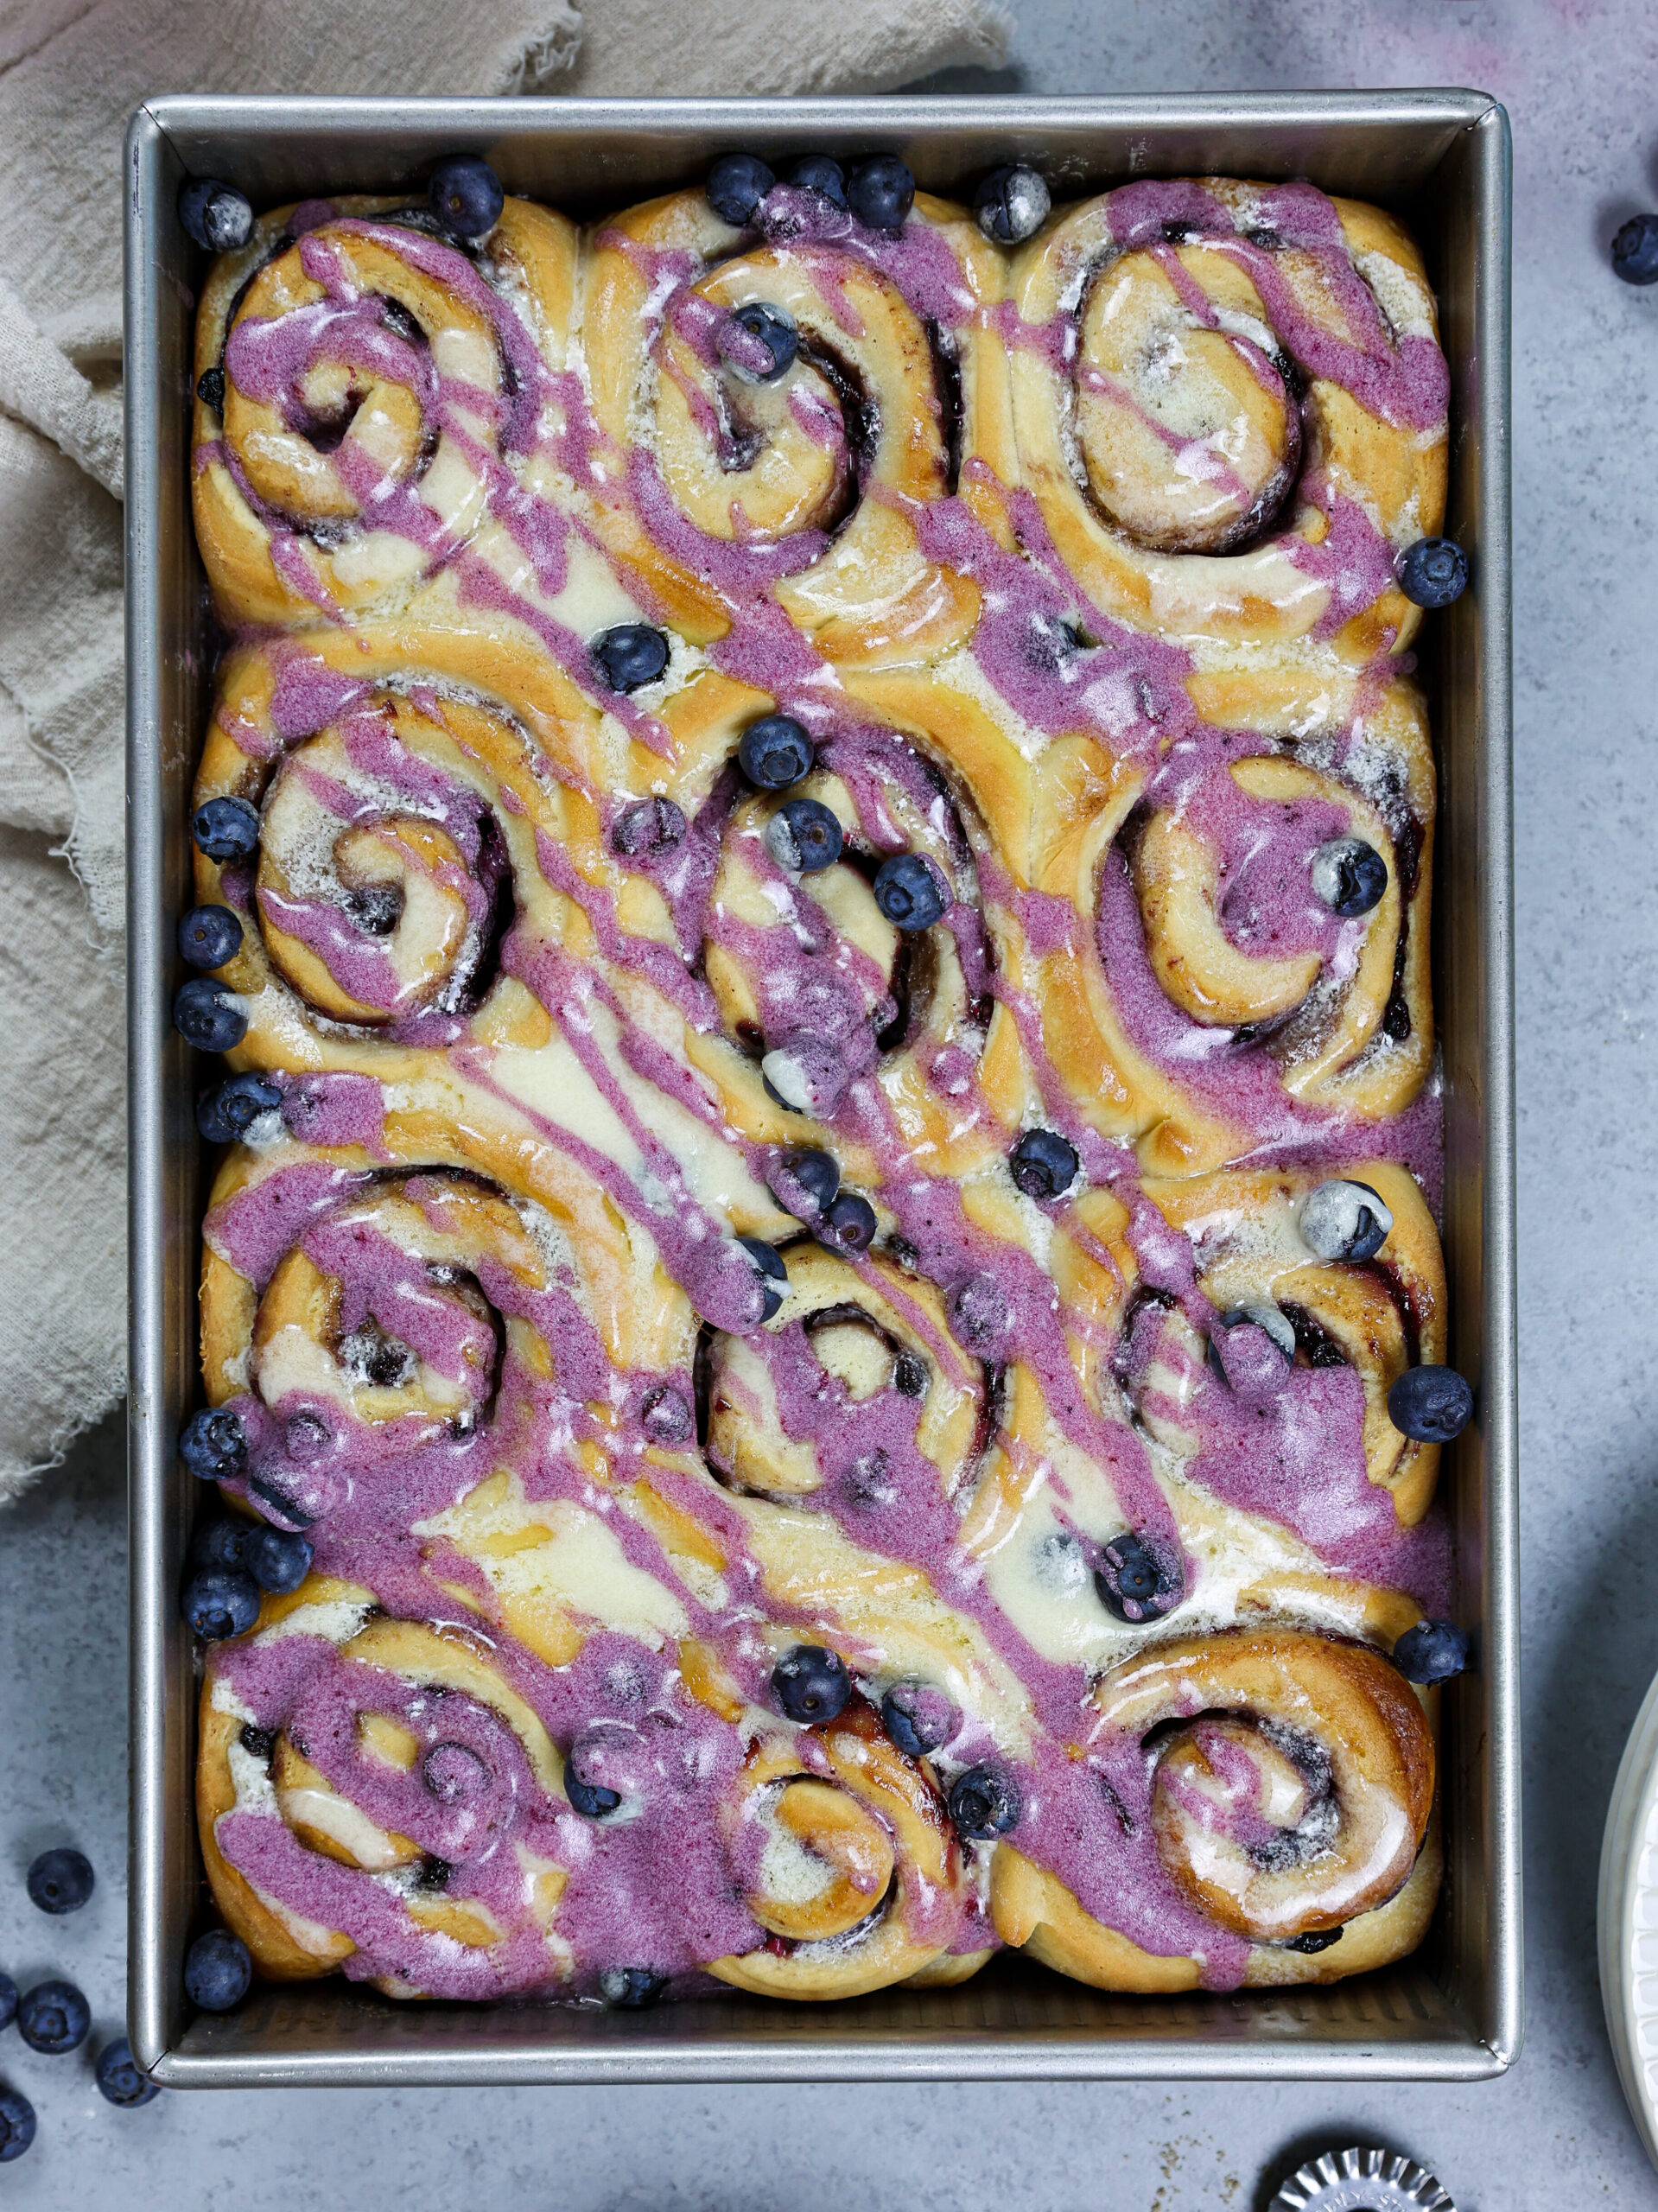 image of blueberry cinnamon rolls that have been baked and drizzled with vanilla and blueberry glaze